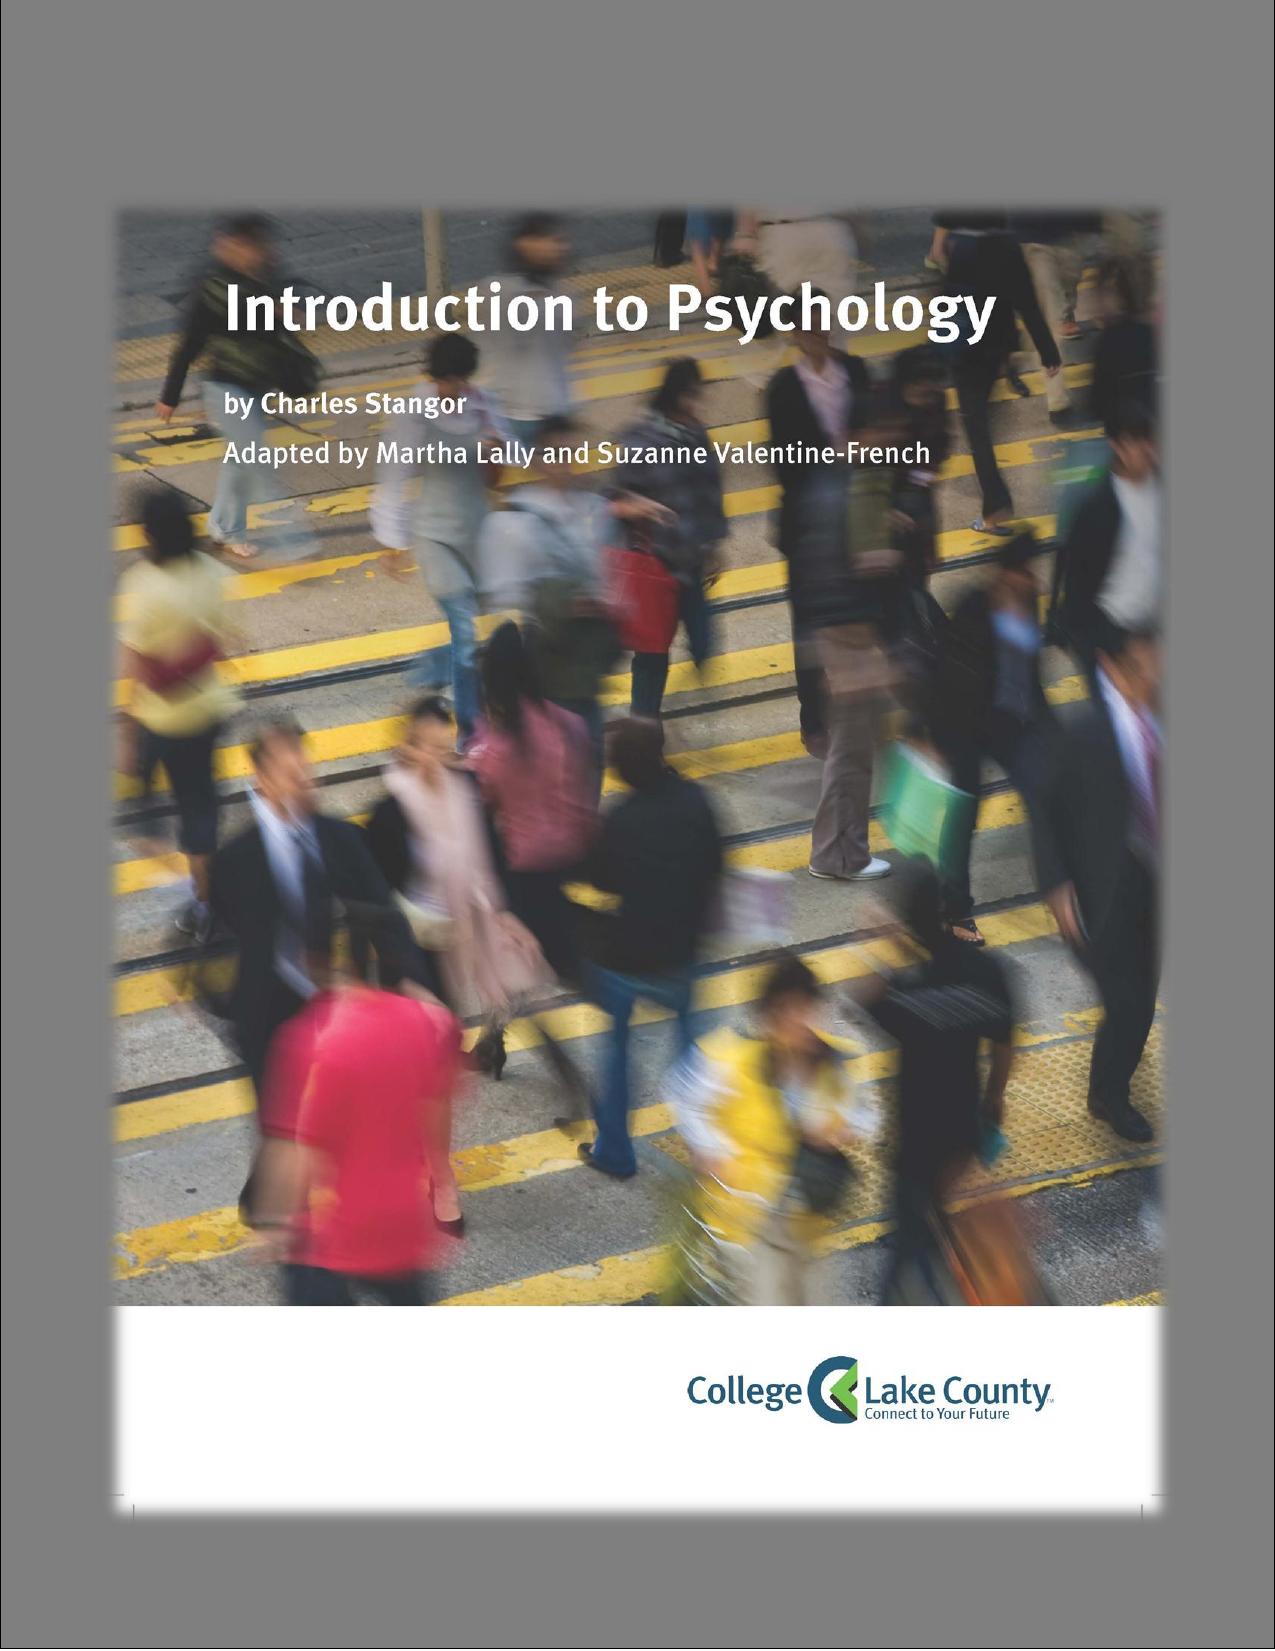 Introduction to Psychology by Charles Stangor 2011